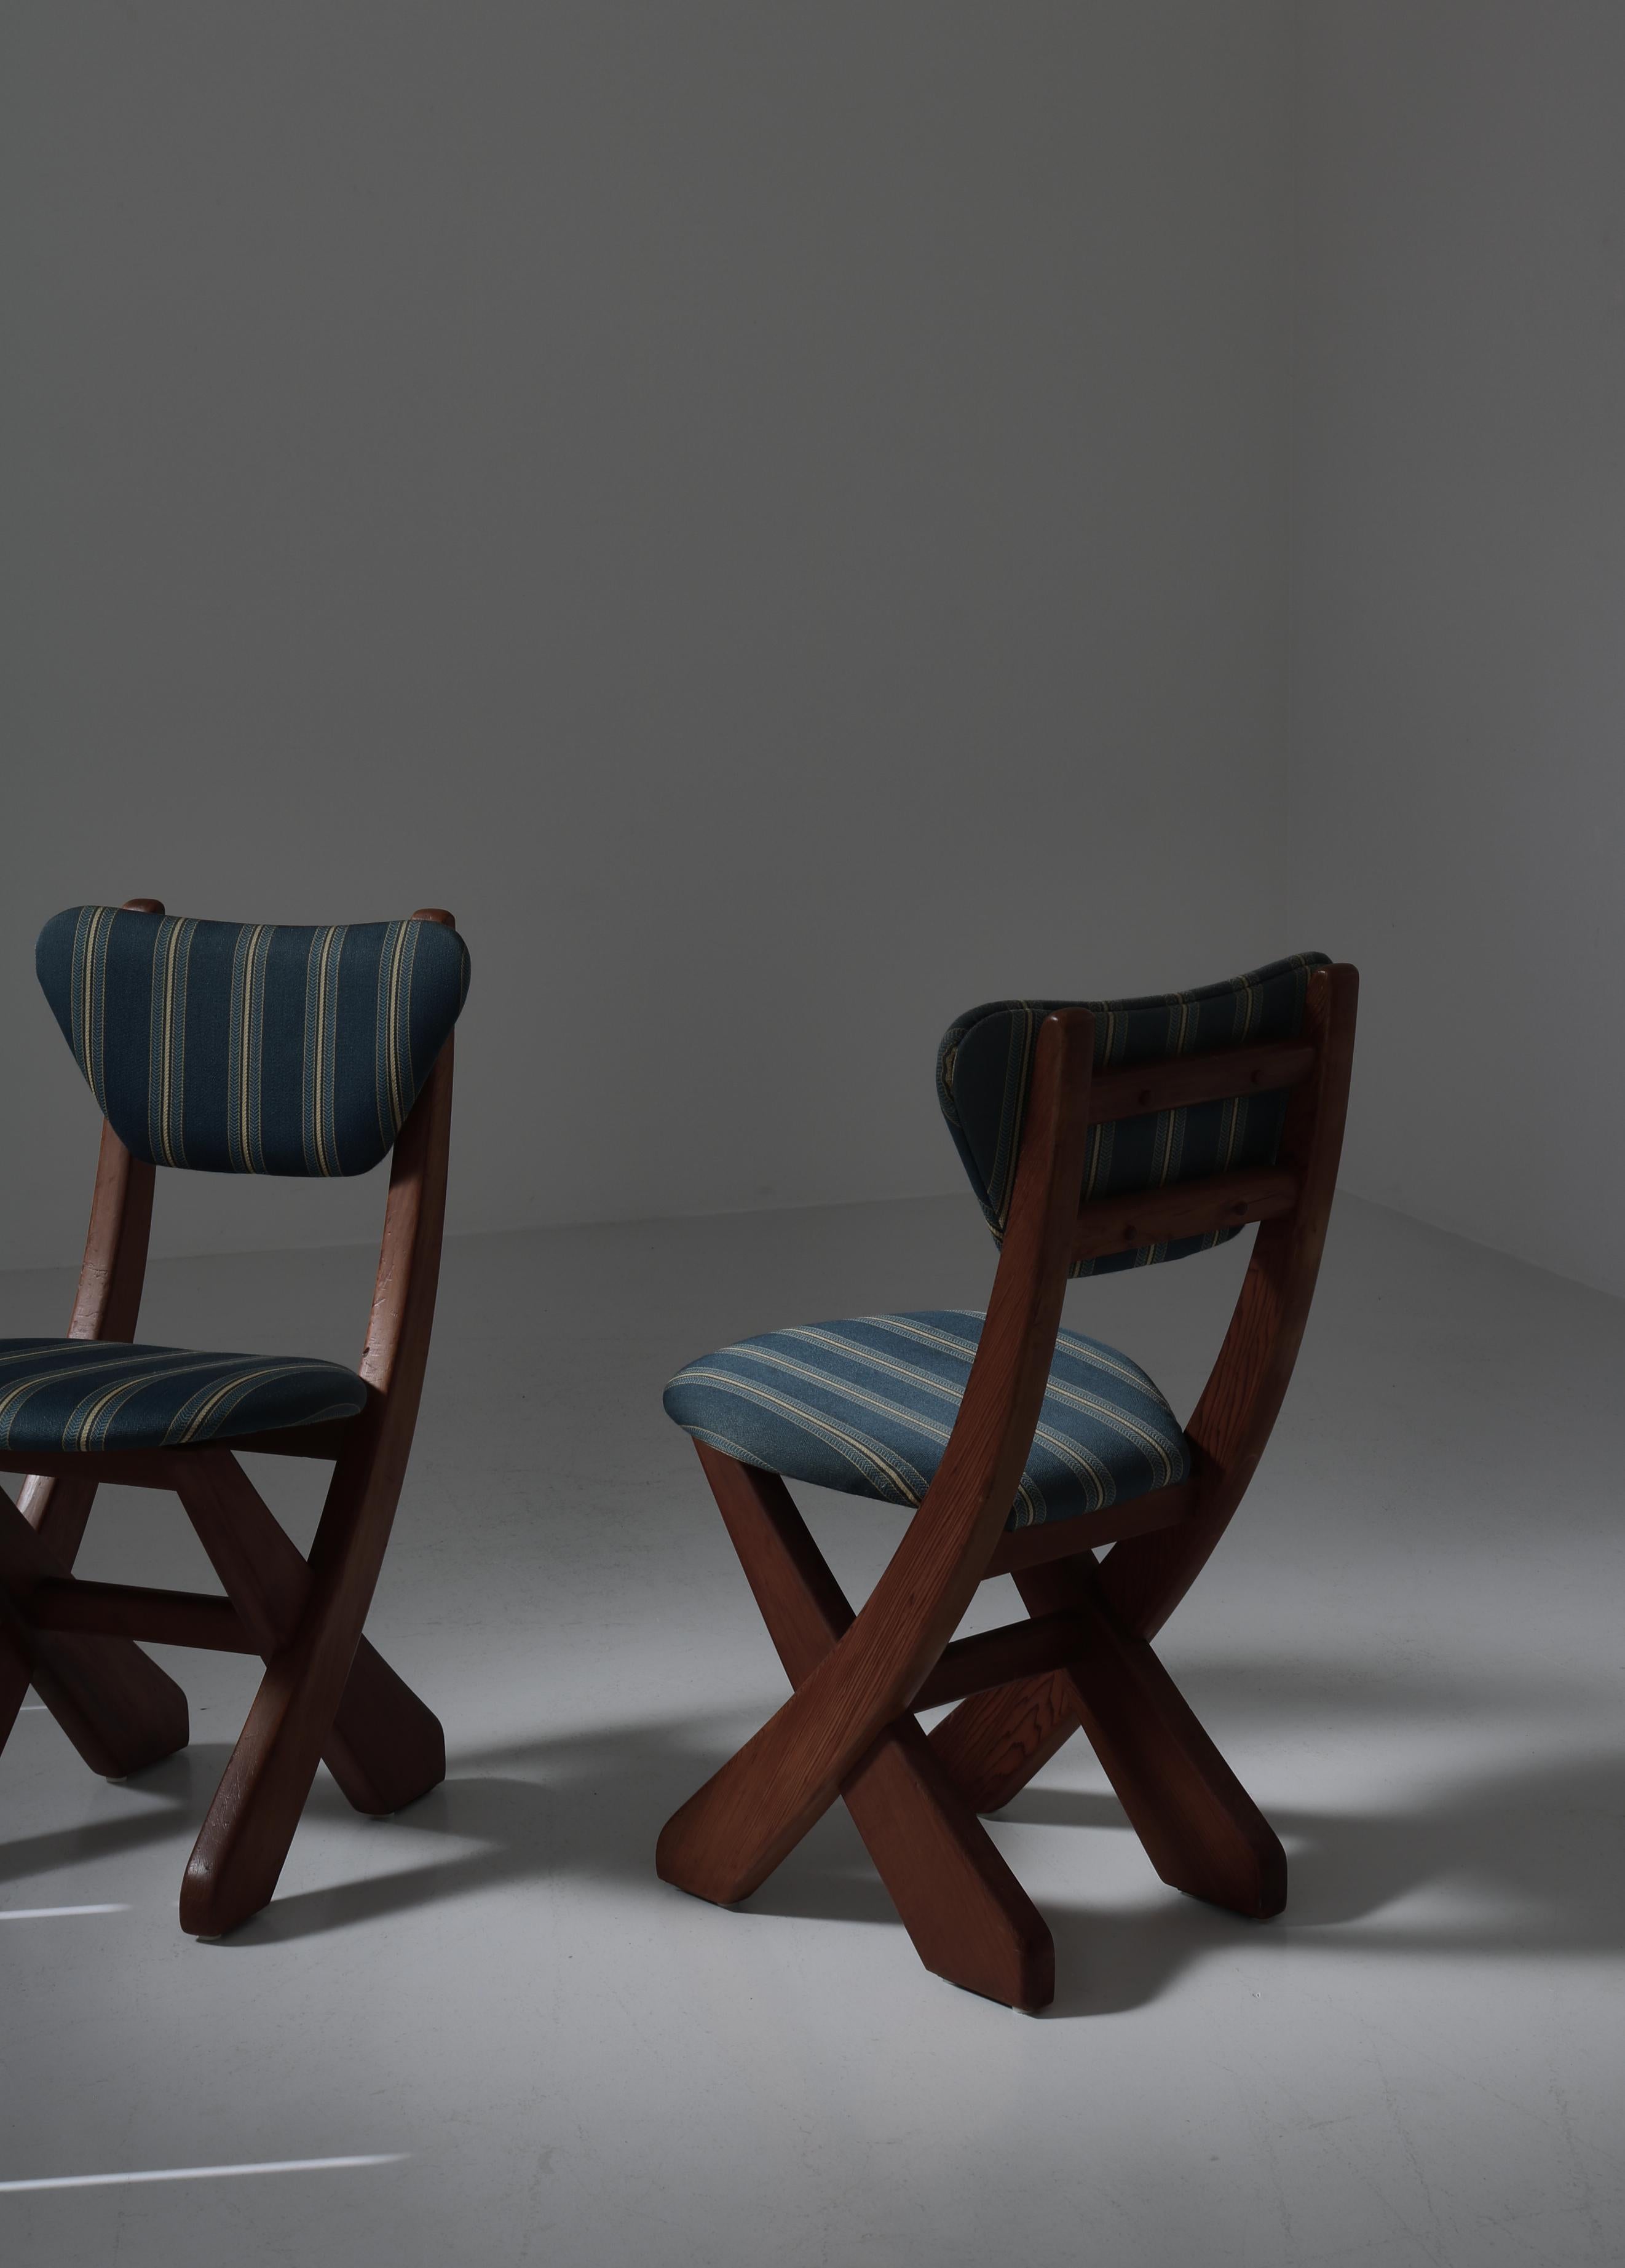 Charming set of Scandinavian Modern dining chairs in solid pinewood and original striped upholstery.